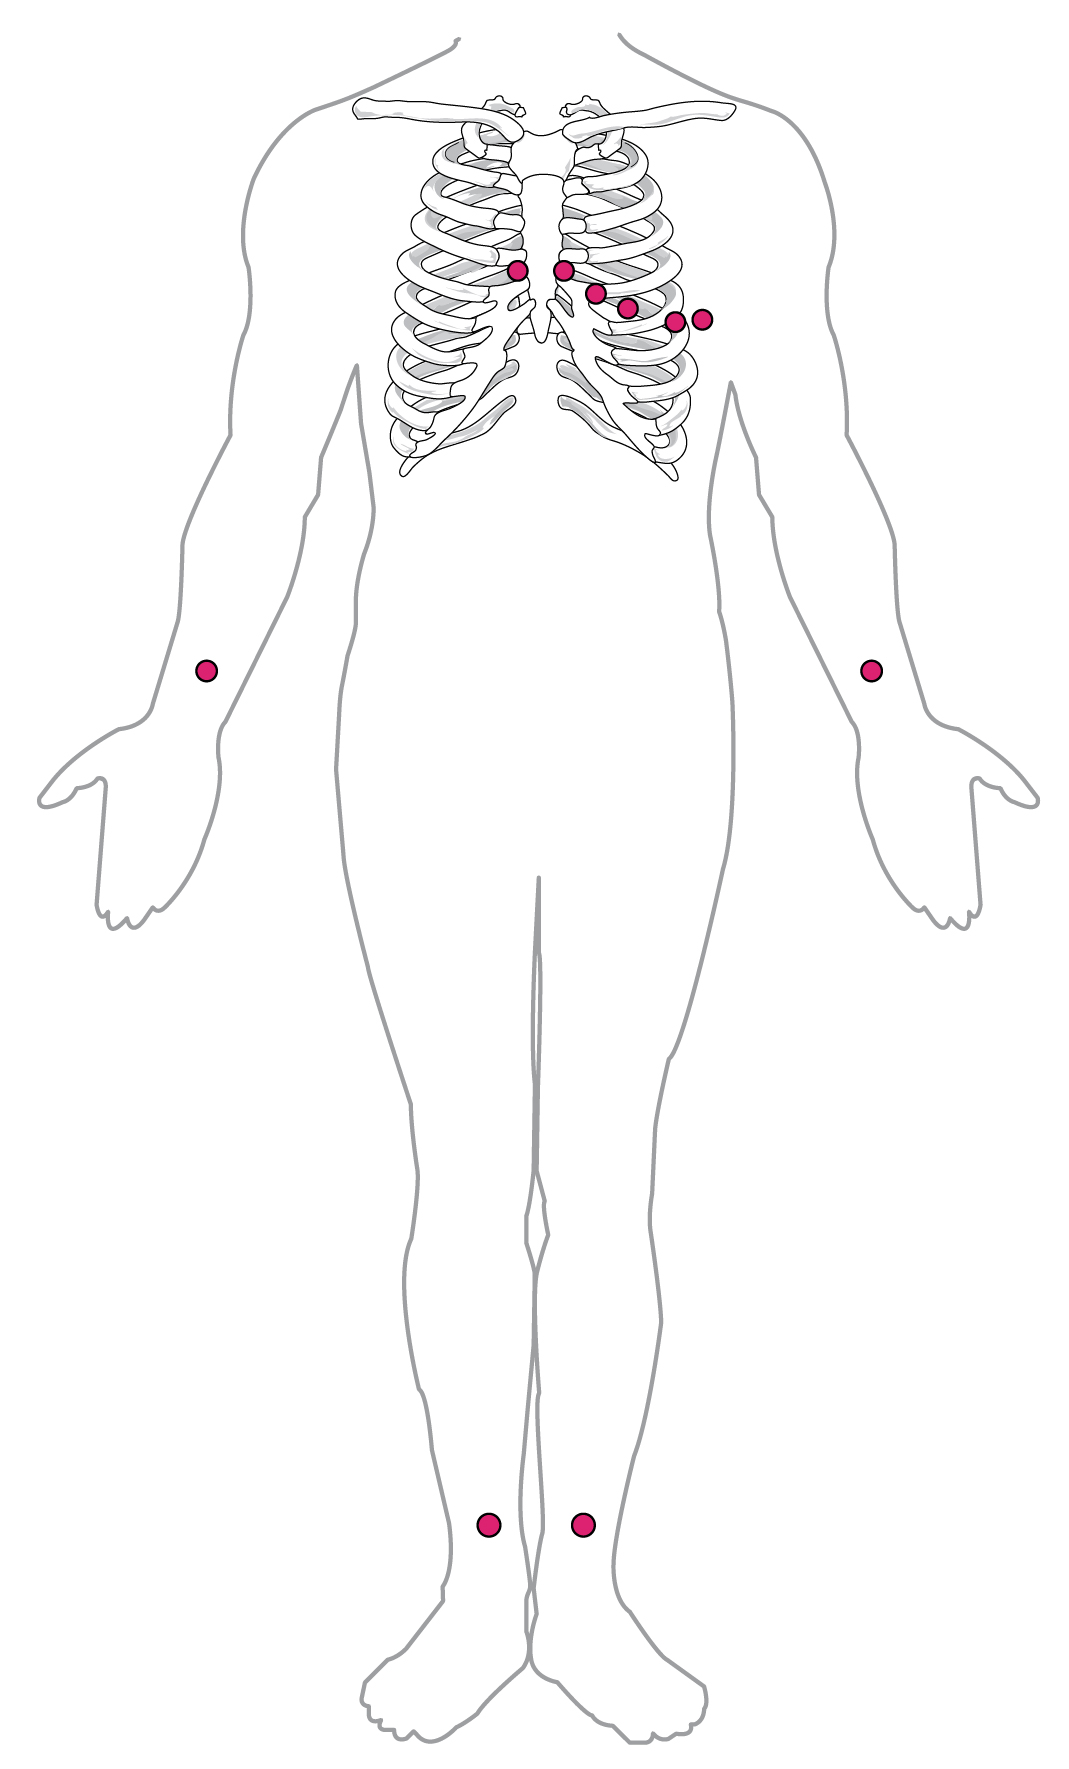 Red dots show the placement of 10 leads for a 12-lead ECG: 6 leads are placed about 2 fingers apart in a curved line pattern starting just to the right of the sternum about 3 fingers above the xyphoid process, straight across the midline to the same position on the left side of the sternum, then curving downward across the left side of the rib cage for the remaining 4 leads of that set. Additional leads are placed on the anterior surface of both wrists and the medial surface of both ankles.